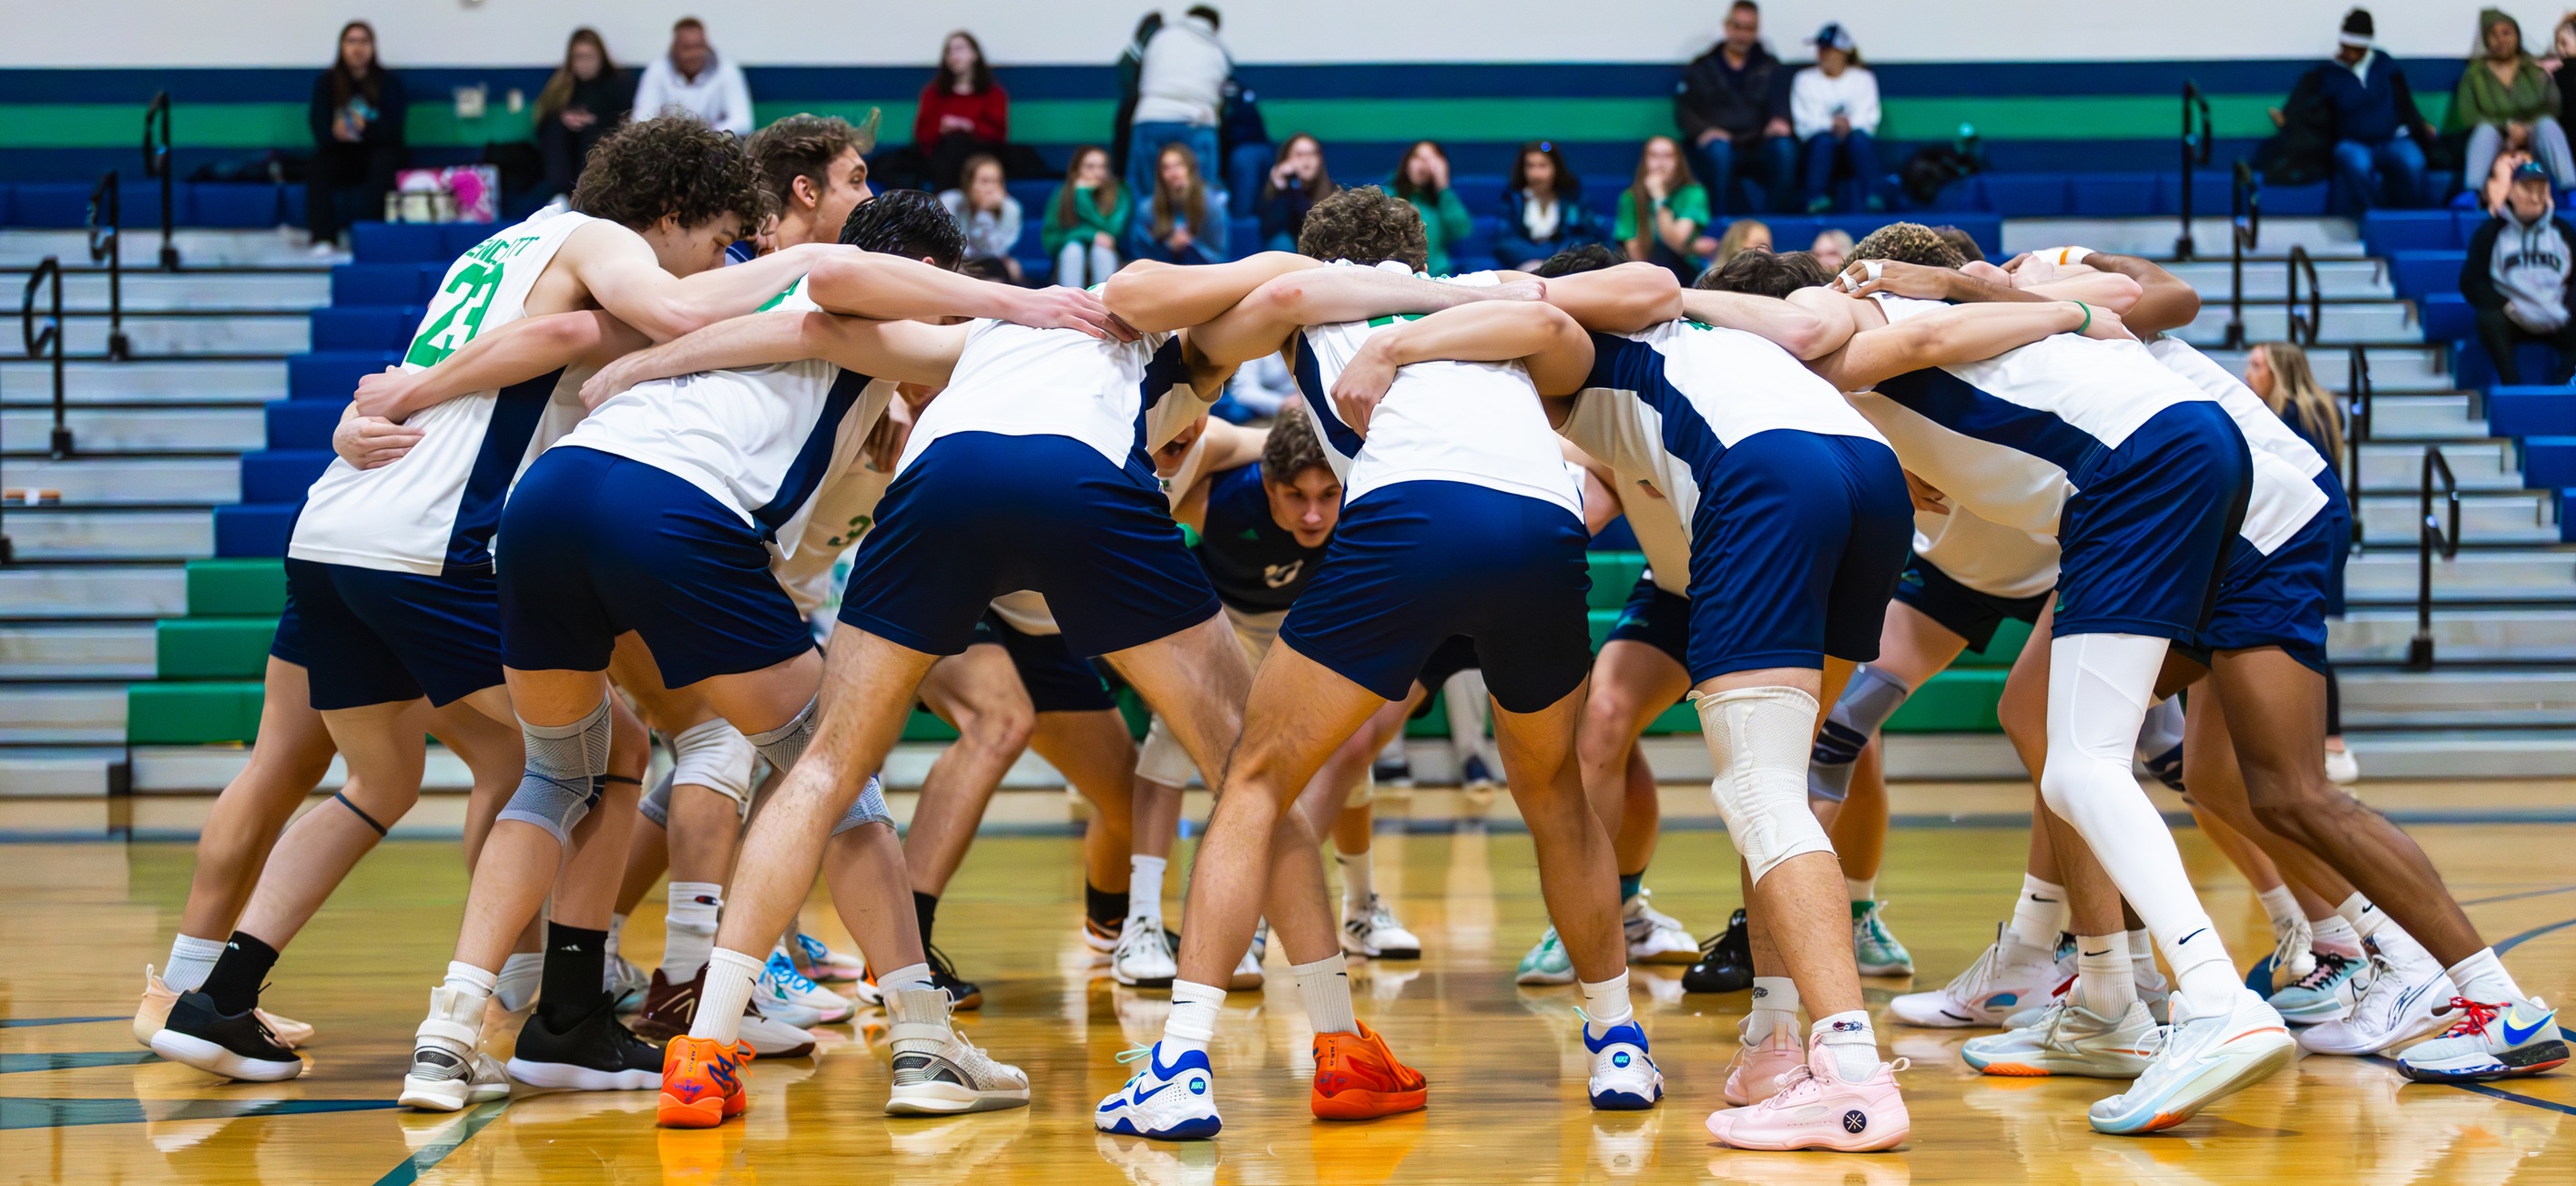 No. 3 Wentworth Holds Off Men’s Volleyball, 3-1